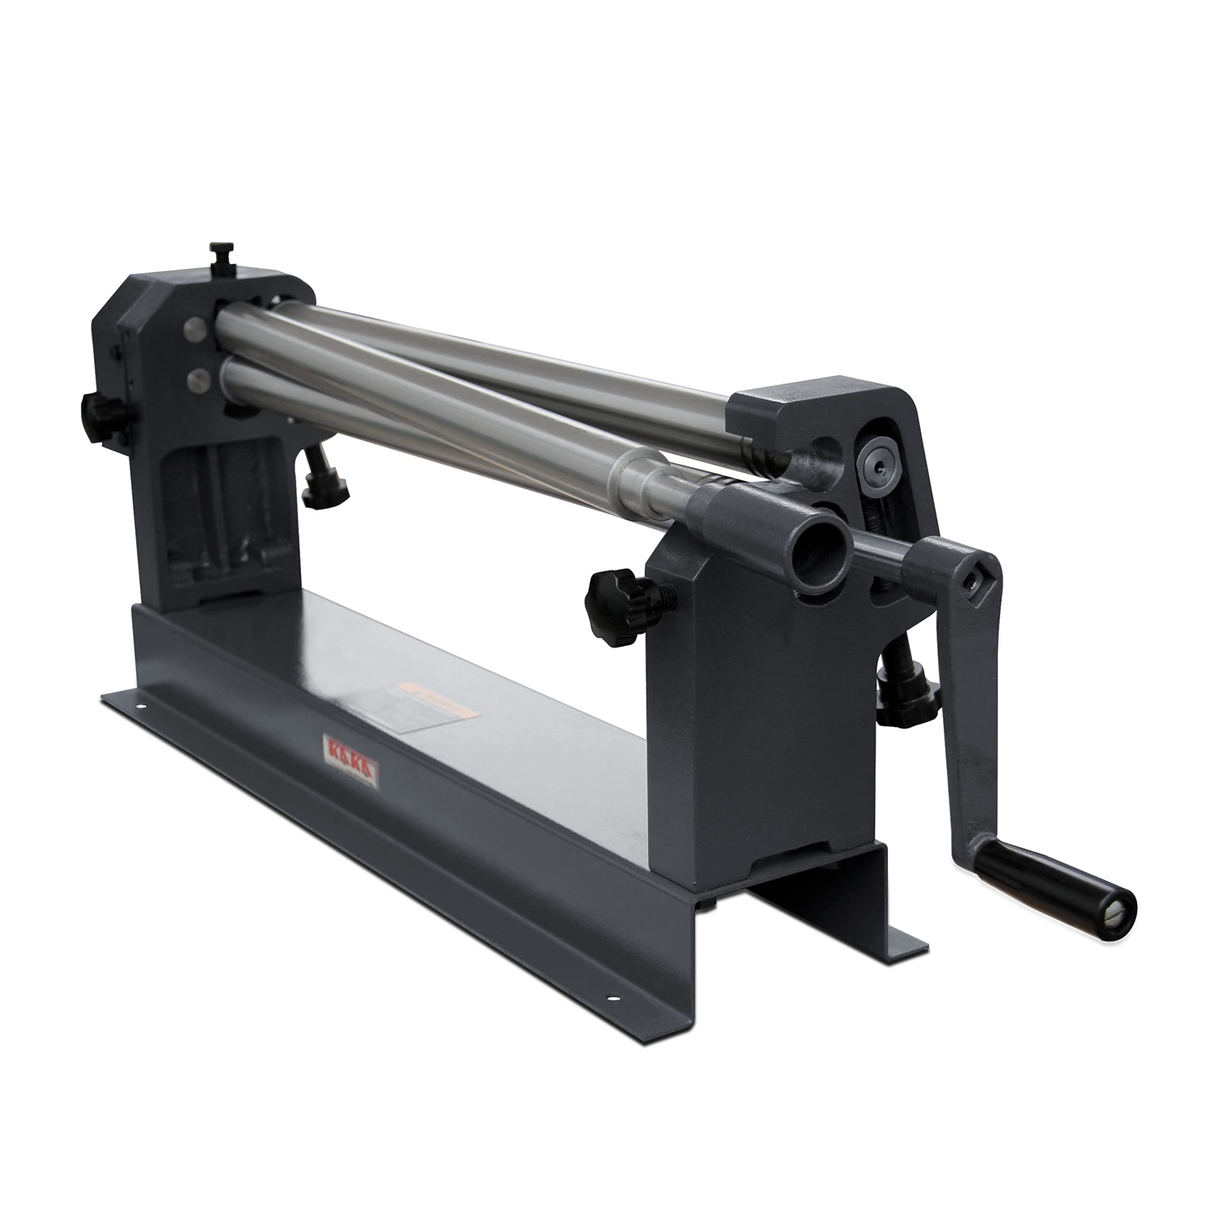 Versatile and Adjustable: With adjustable rolling radius, you can create gentle arcs, bends, cones, and cylinders for various thicknesses in sheet metal. Plus, our machine can also cone materials, making it a useful tool for press bending ornamental iron, mild steel, aluminum, and other metals.